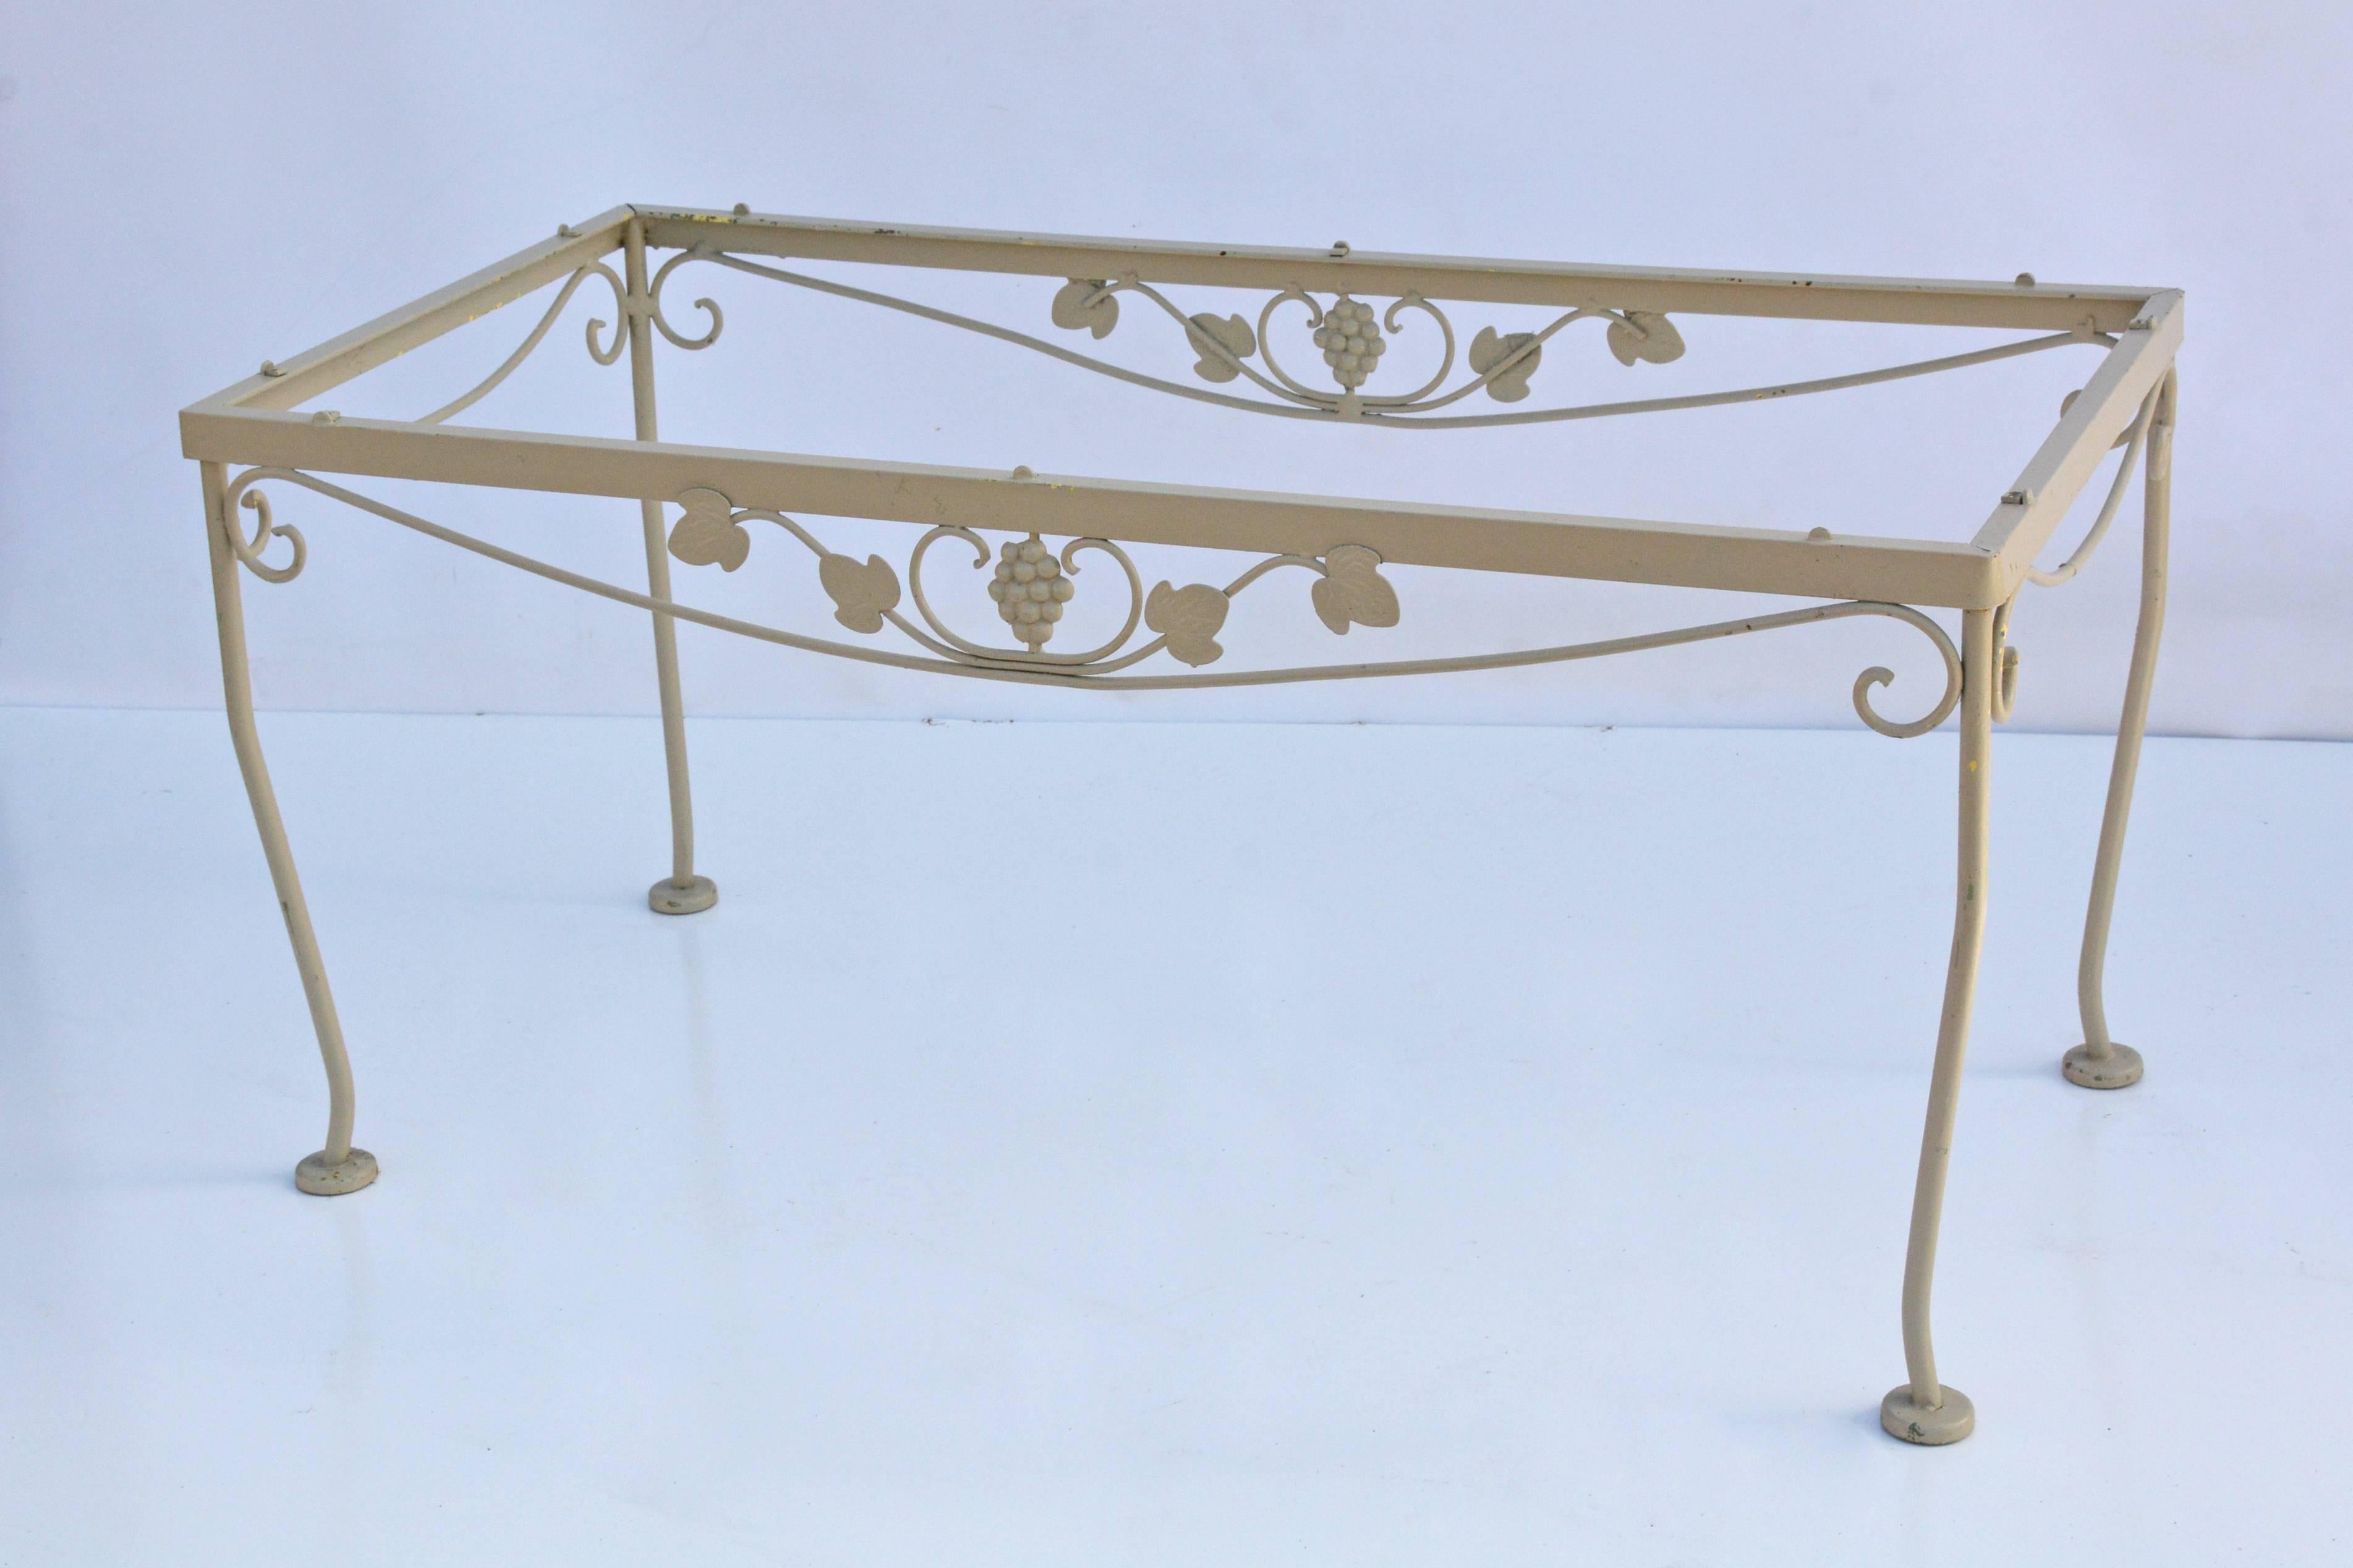 The table is wrought iron painted cream and embellished with grapes and leaves. Tabs are in place for holding a required glass top. The feet are hollow for holding pads to prevent floor scratches. See other matching pieces.